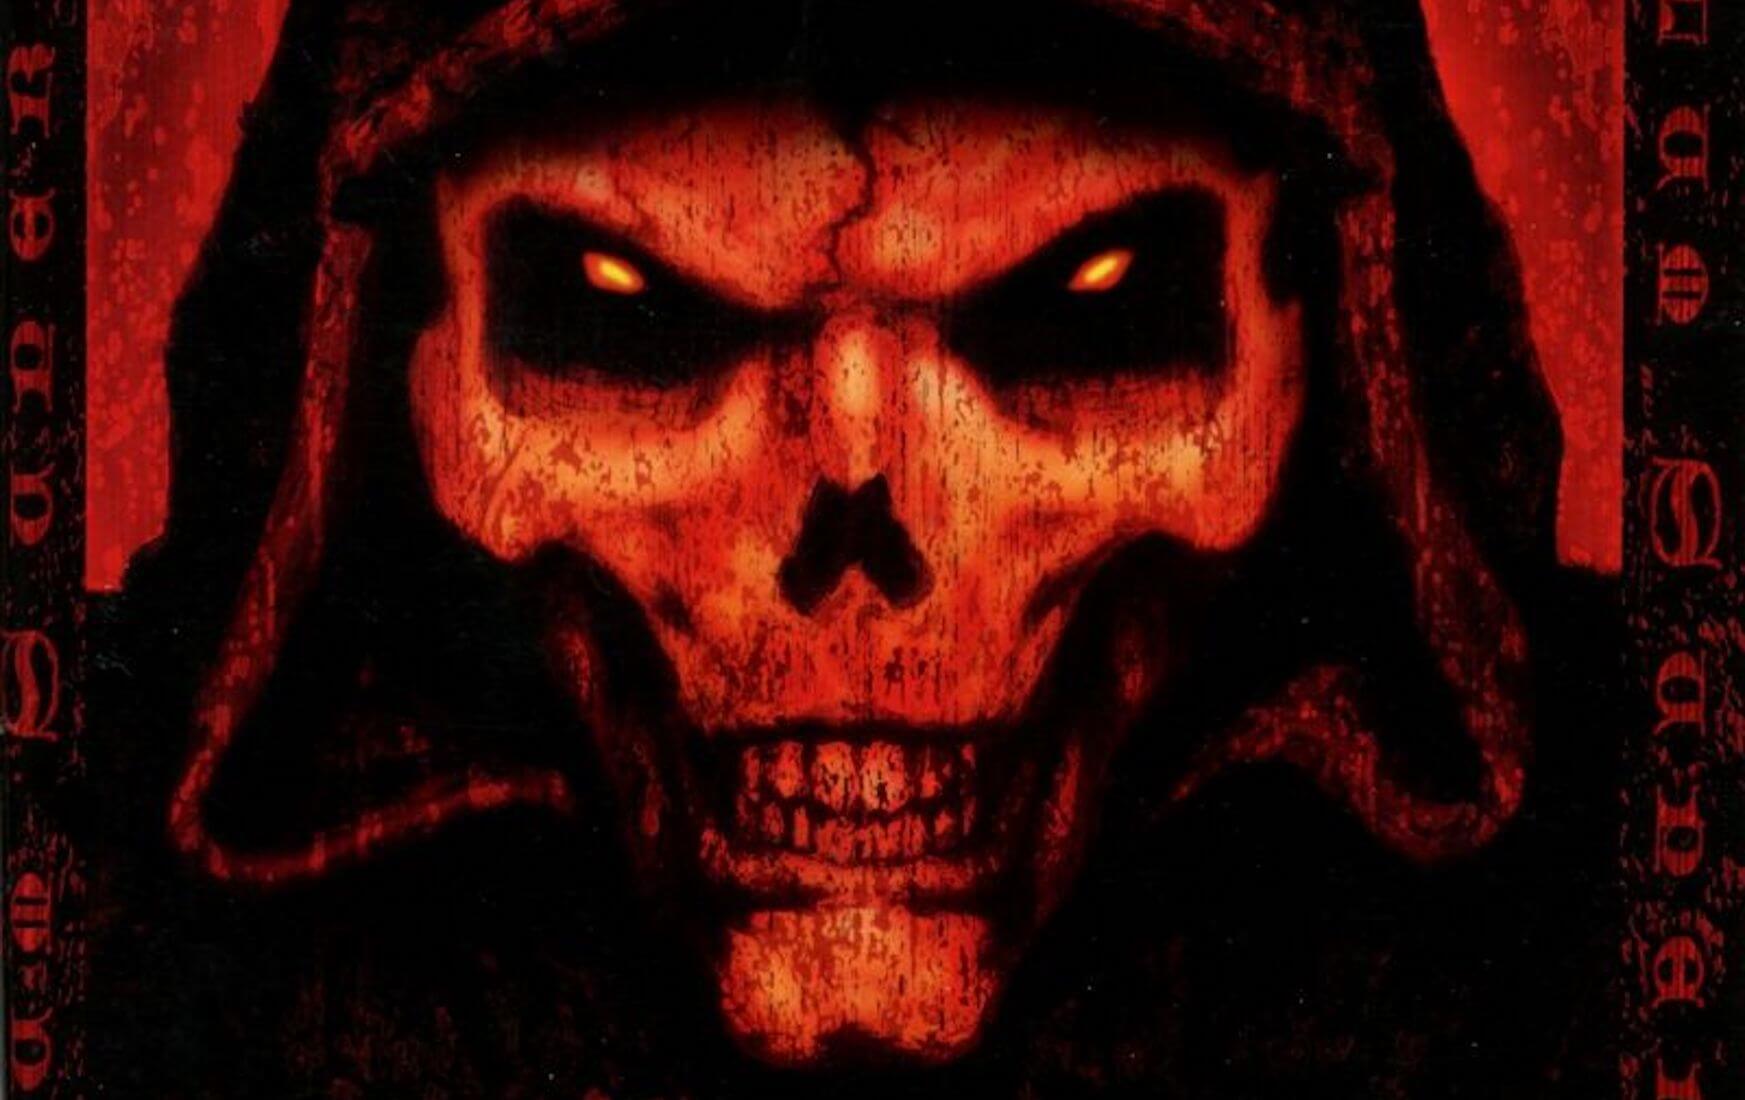 Diablo 2 remaster will reportedly arrive in Q4 2020